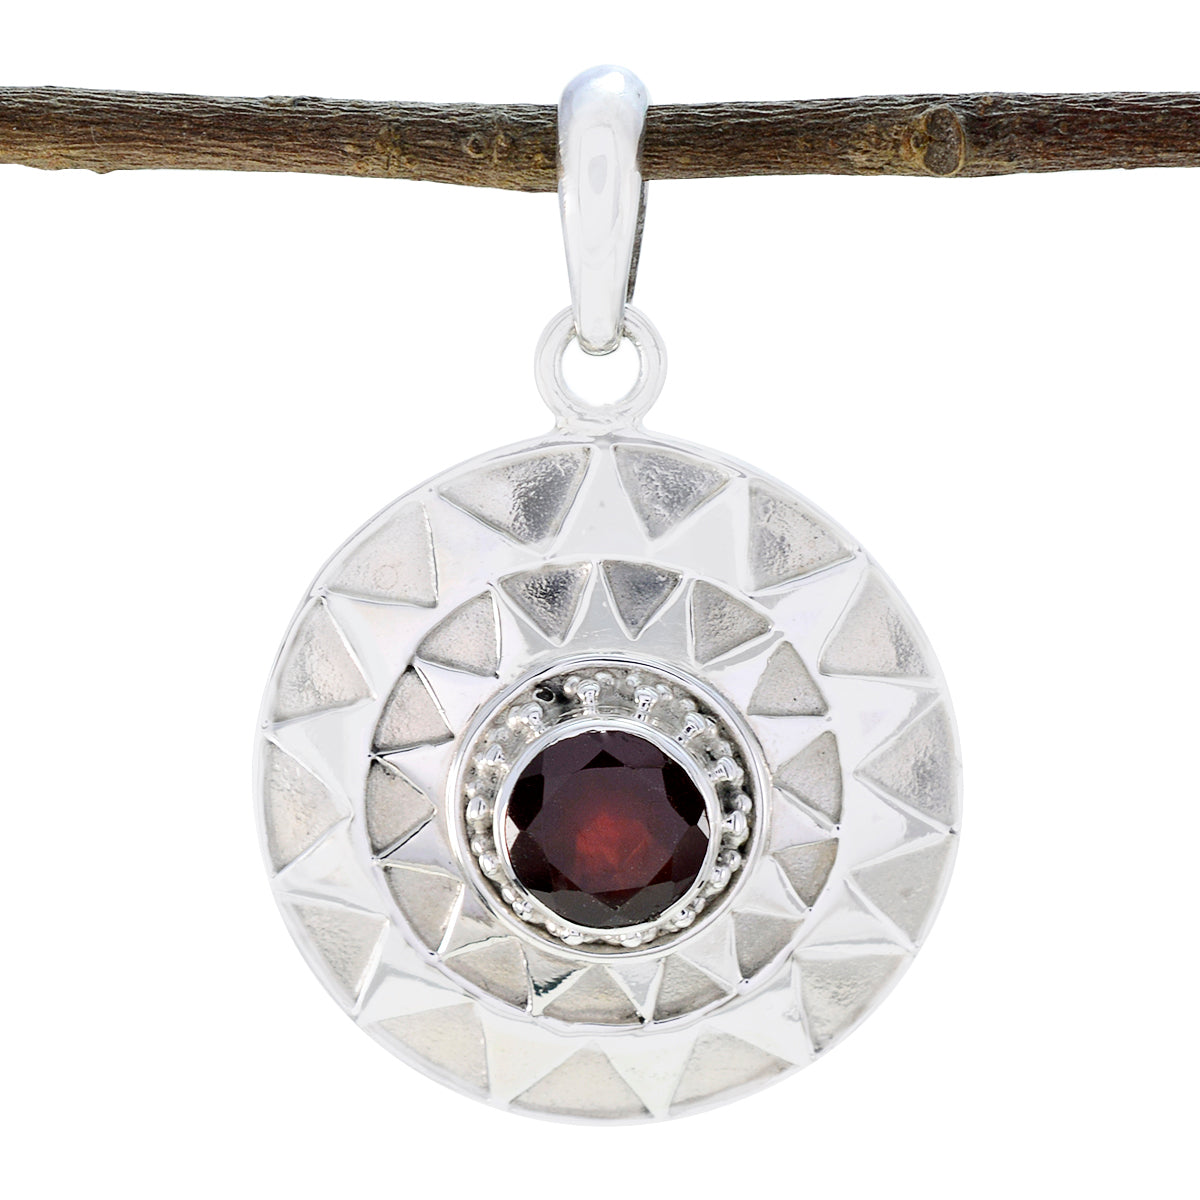 Riyo Natural Gemstone Round Faceted Red Garnet Solid Silver Pendants gift for anniversary